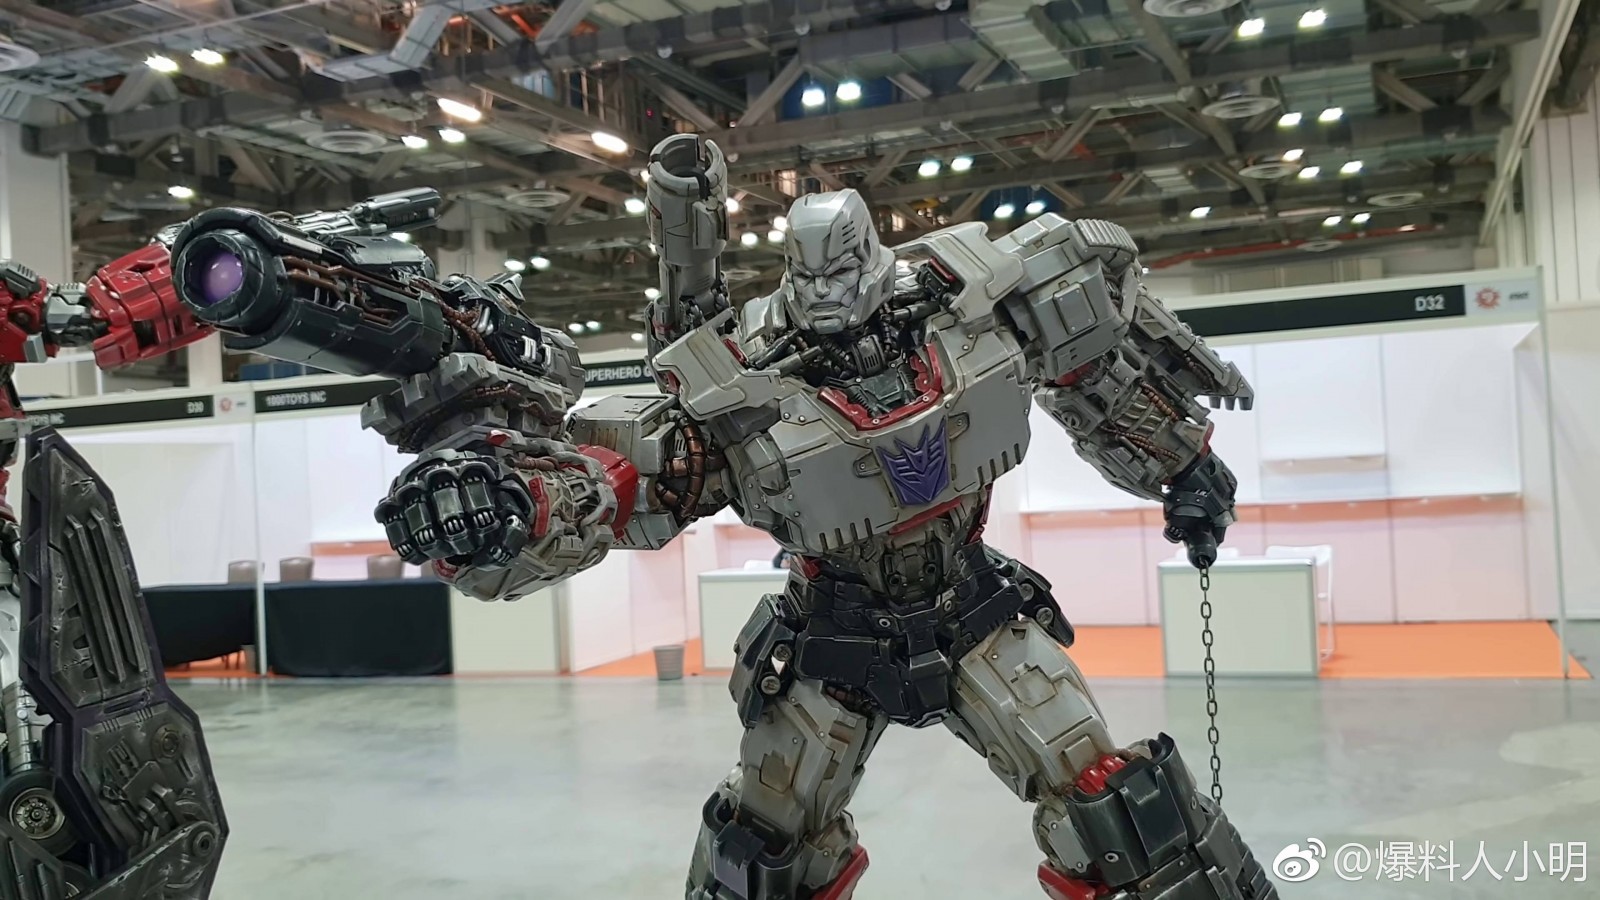 Video And Images Of Xm Studios Megatron Statue - Bumblebee Movie Megatron Deleted Scene - HD Wallpaper 